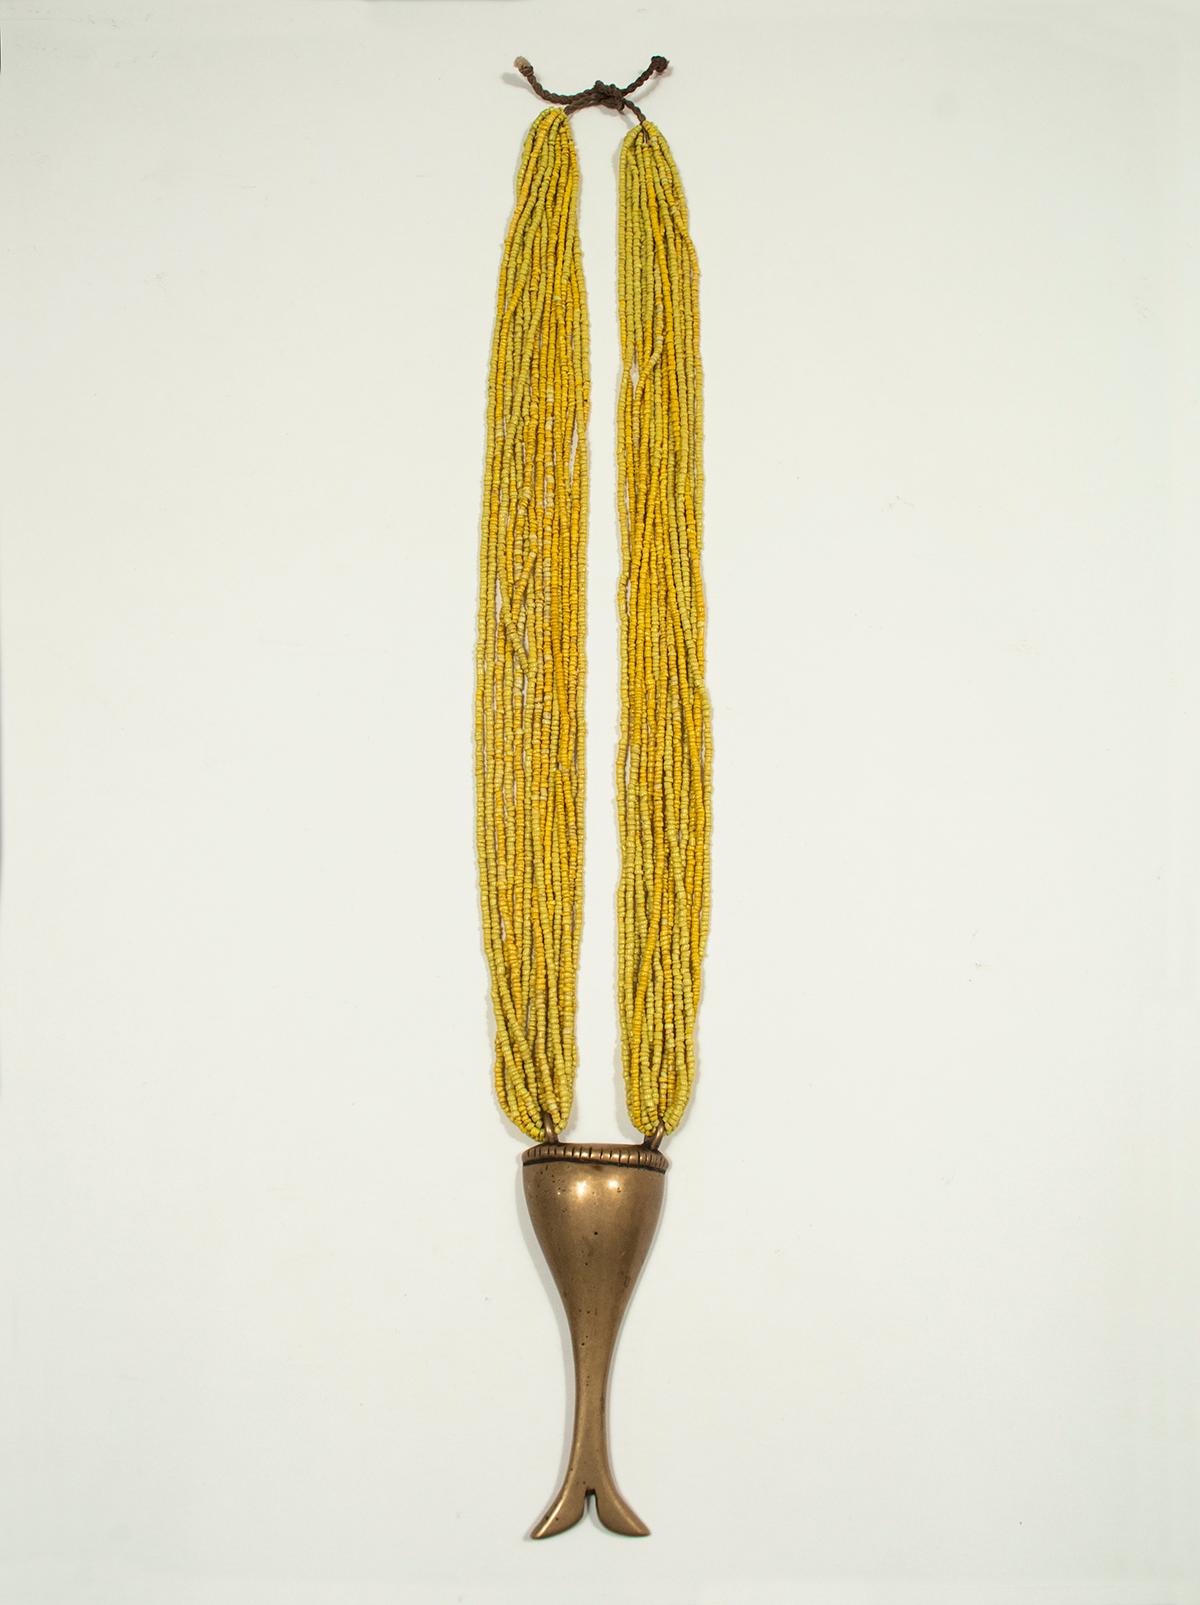 Hand-Crafted 19th Century Brass Pendant on Yellow Multi-Strand Beaded Necklace, Naga, India For Sale